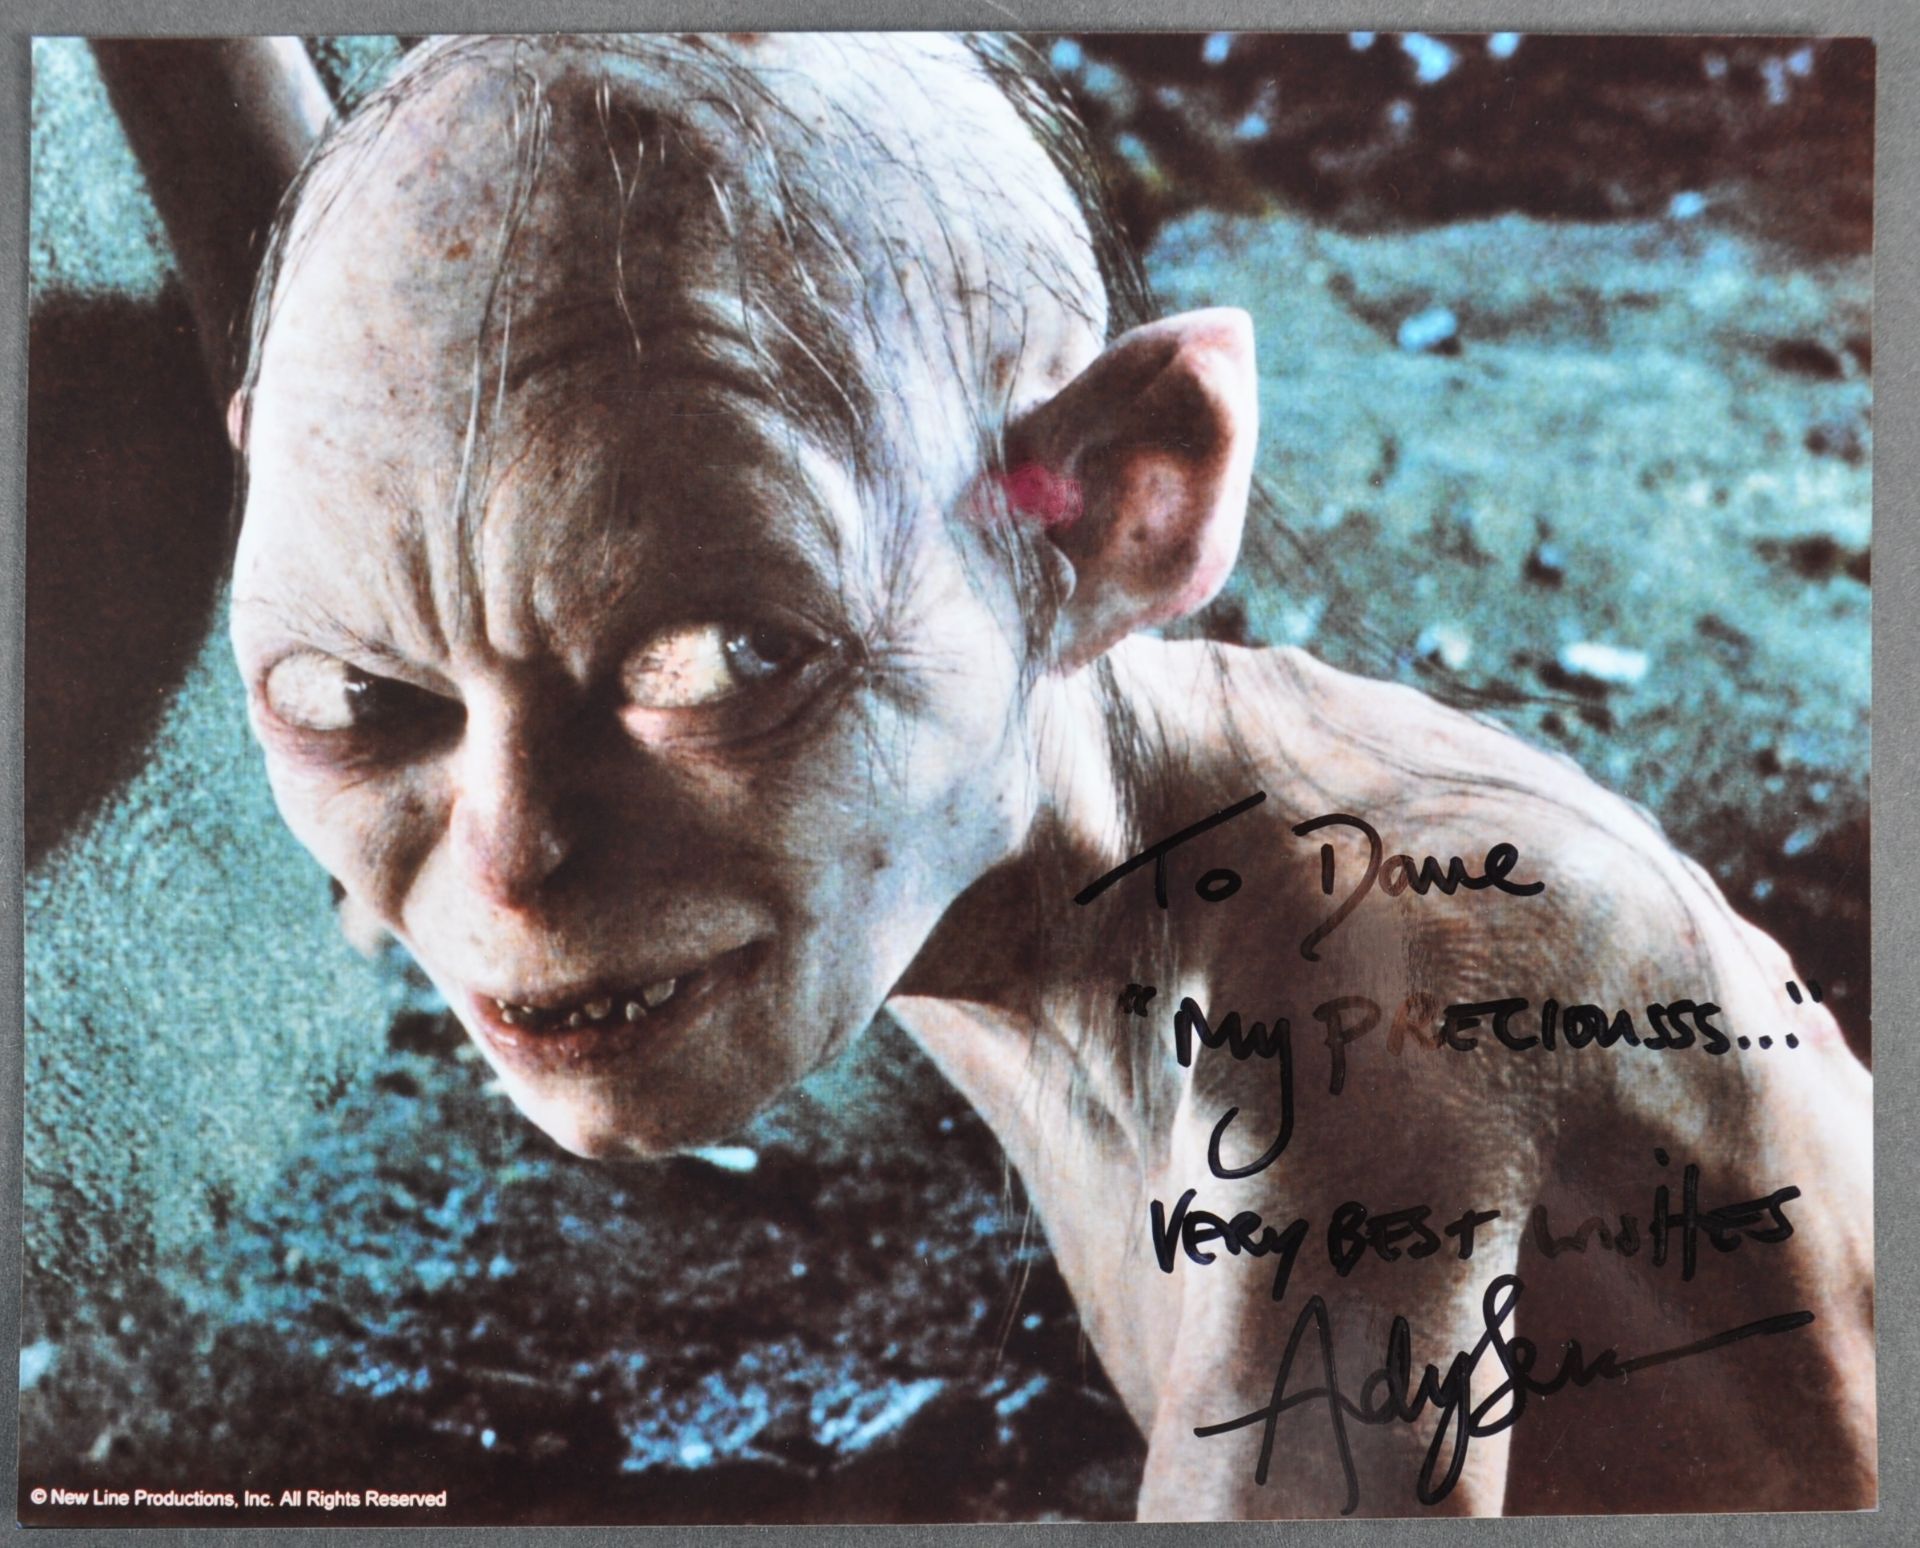 ESTATE OF DAVE PROWSE - ANDY SERKIS LORD OF THE RINGS SIGNED PHOTO